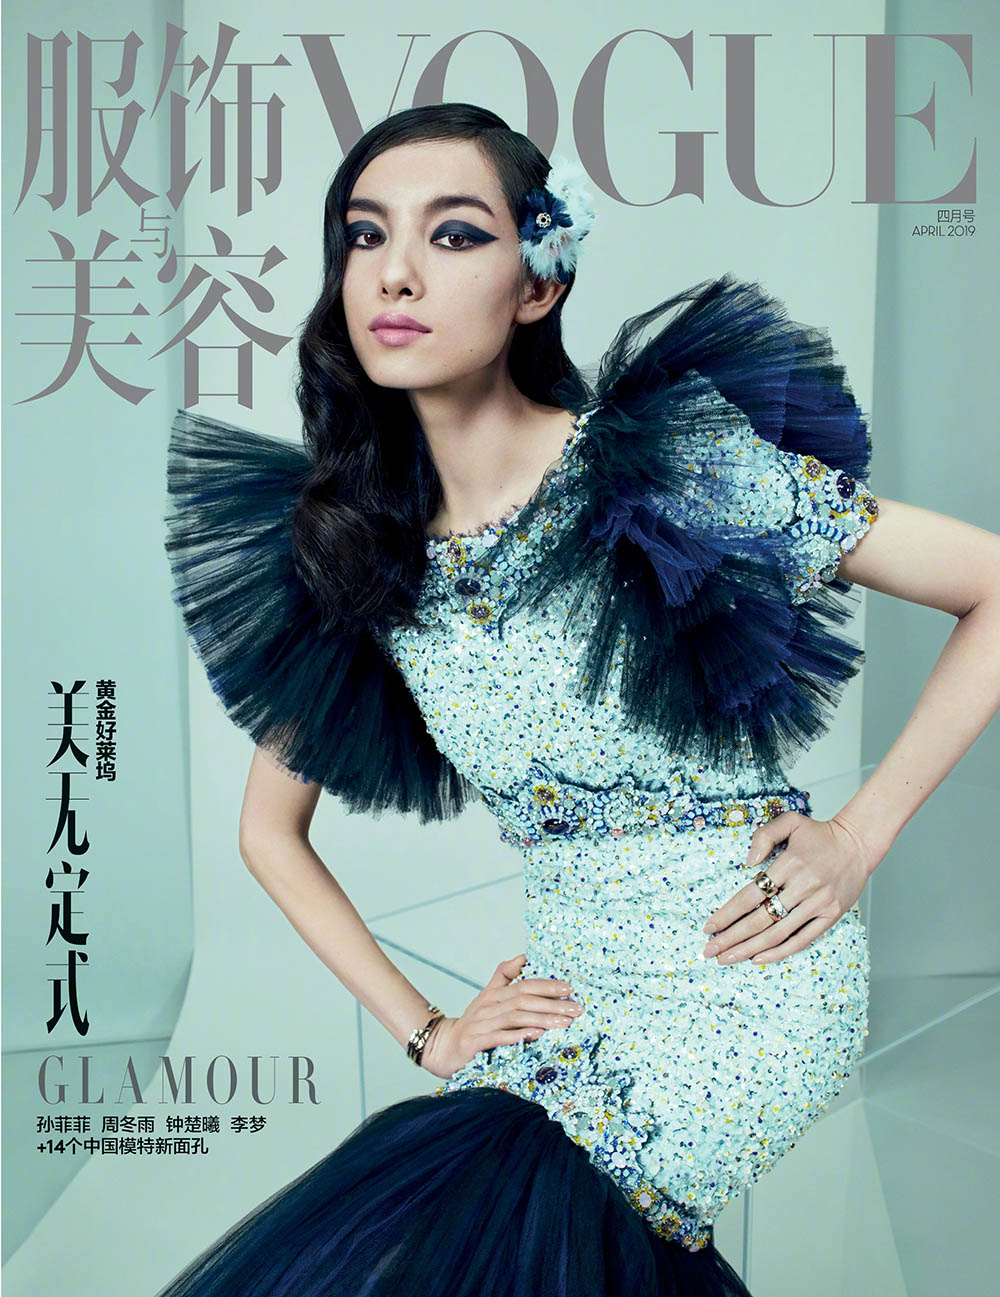 Fei Fei Sun covers Vogue China April 2019 by Emma Summerton